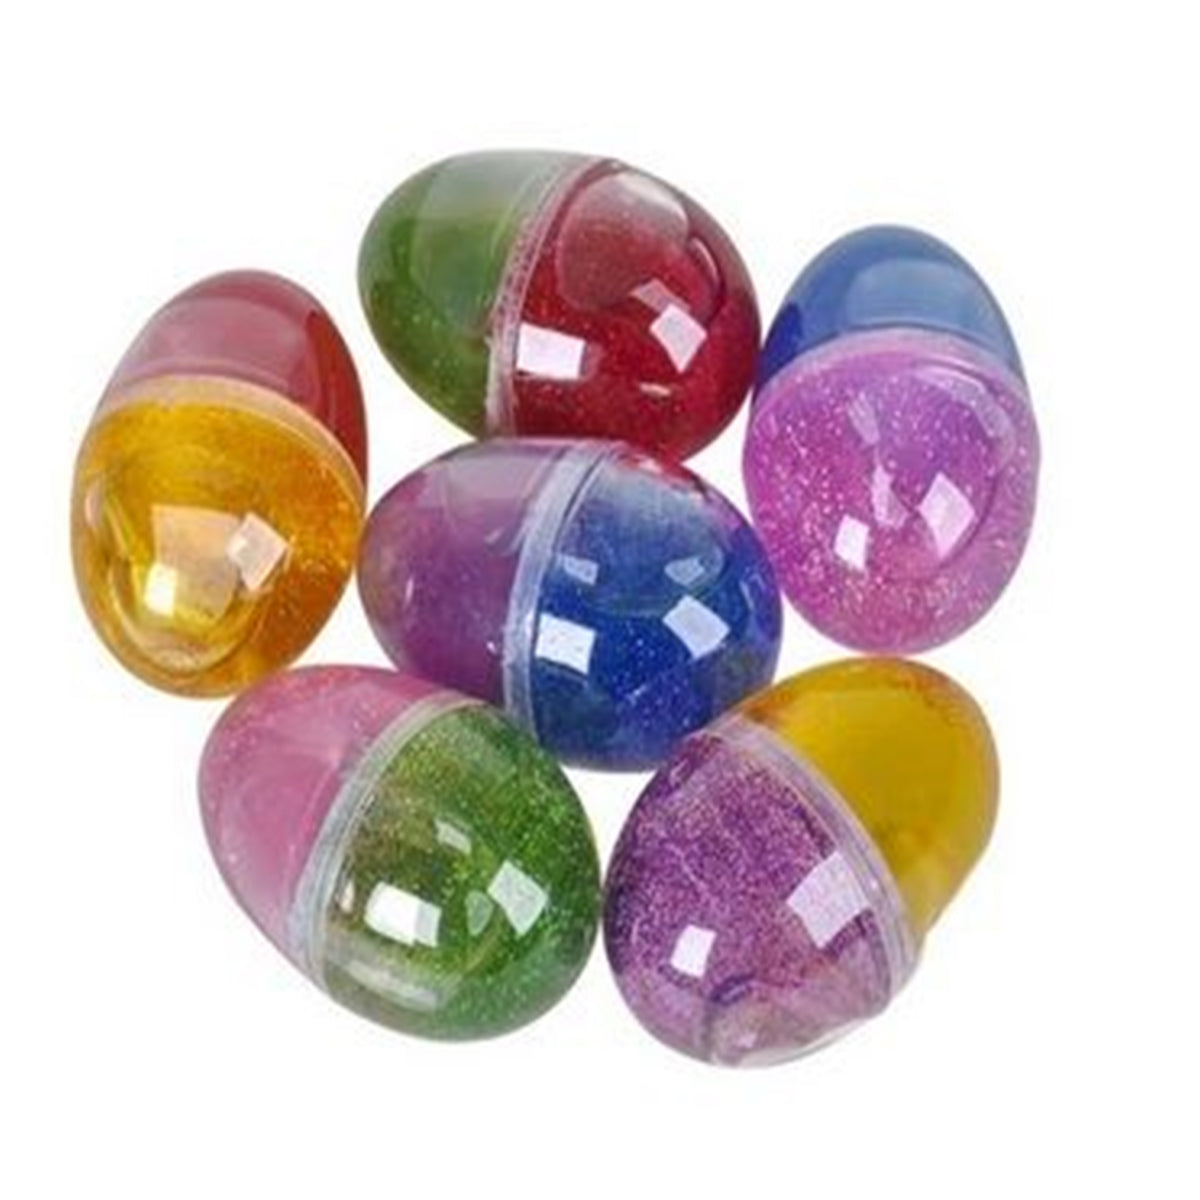 Two-Tone Putty Egg kids Toys In Bulk- Assorted